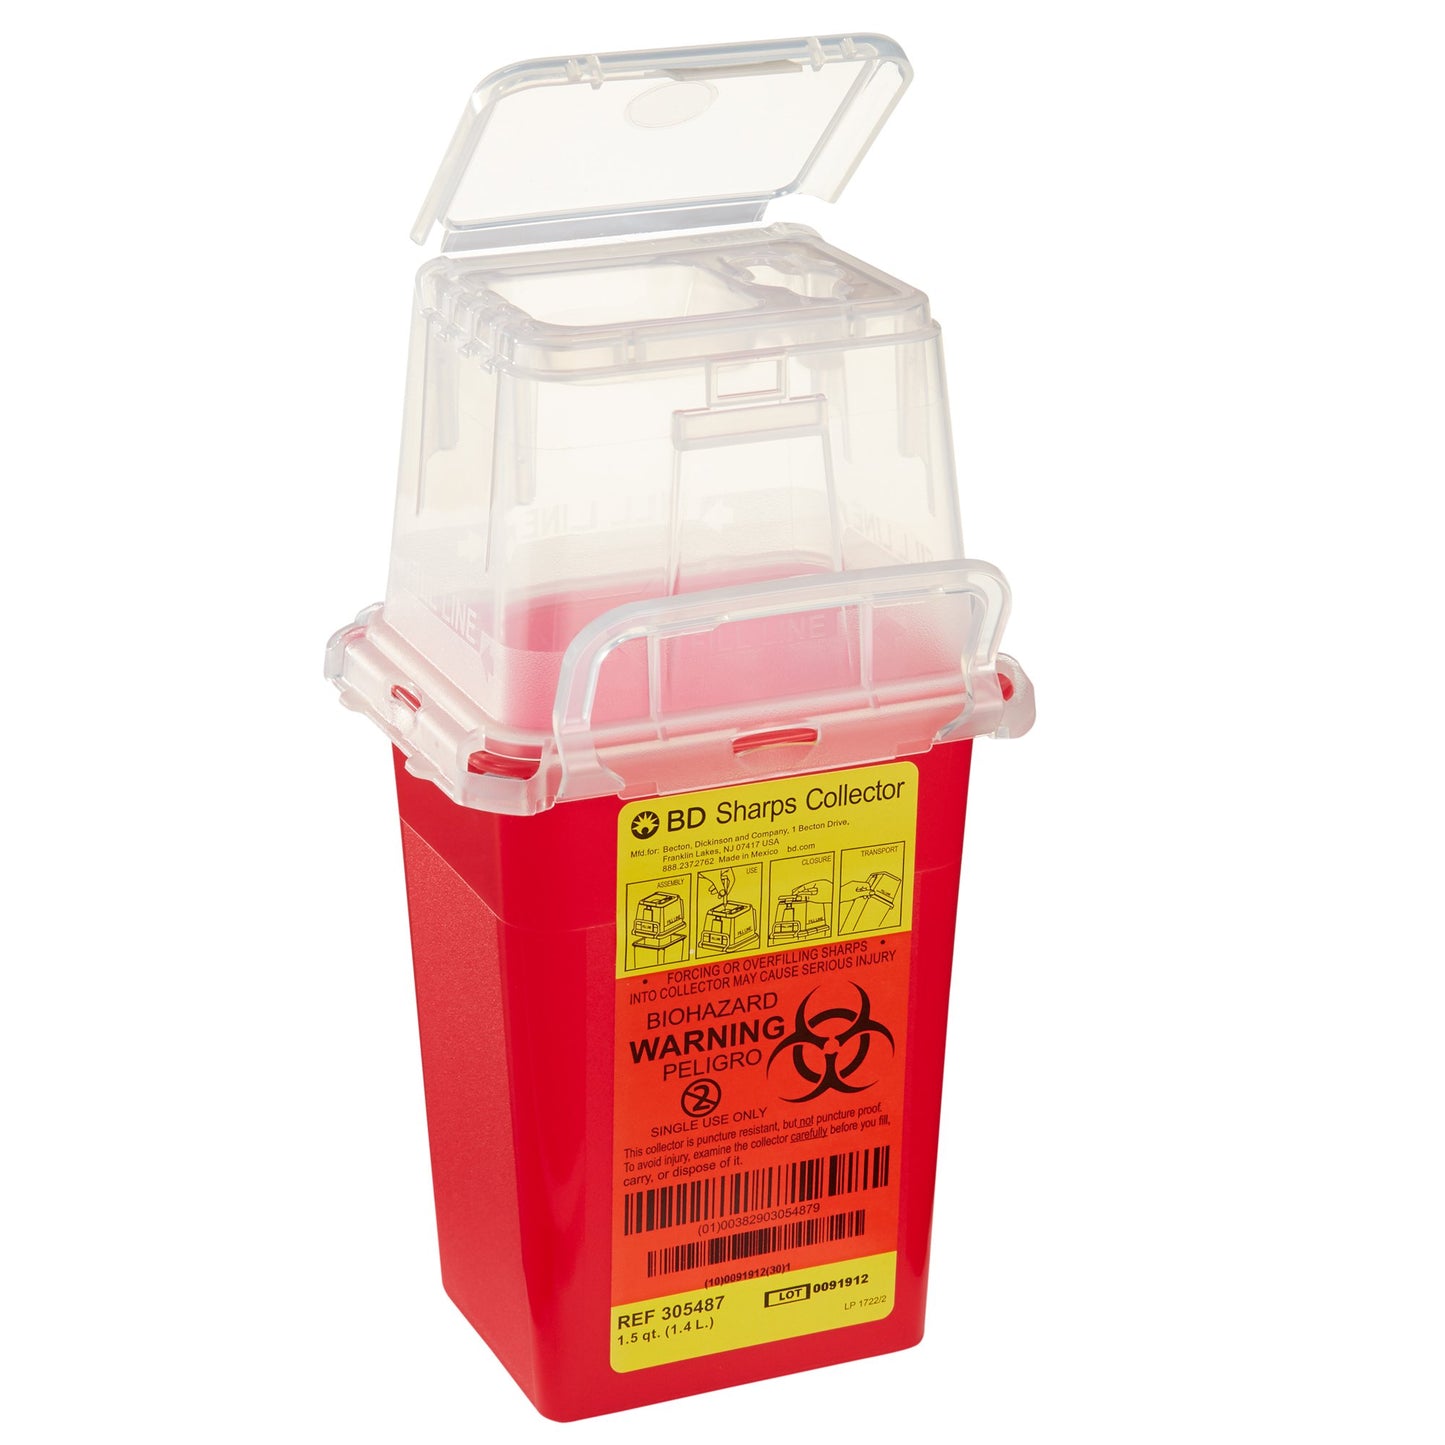 BD Phlebotomy Sharps Container, 1-1/2 Quart, 9 x 4-1/2 x 4 "